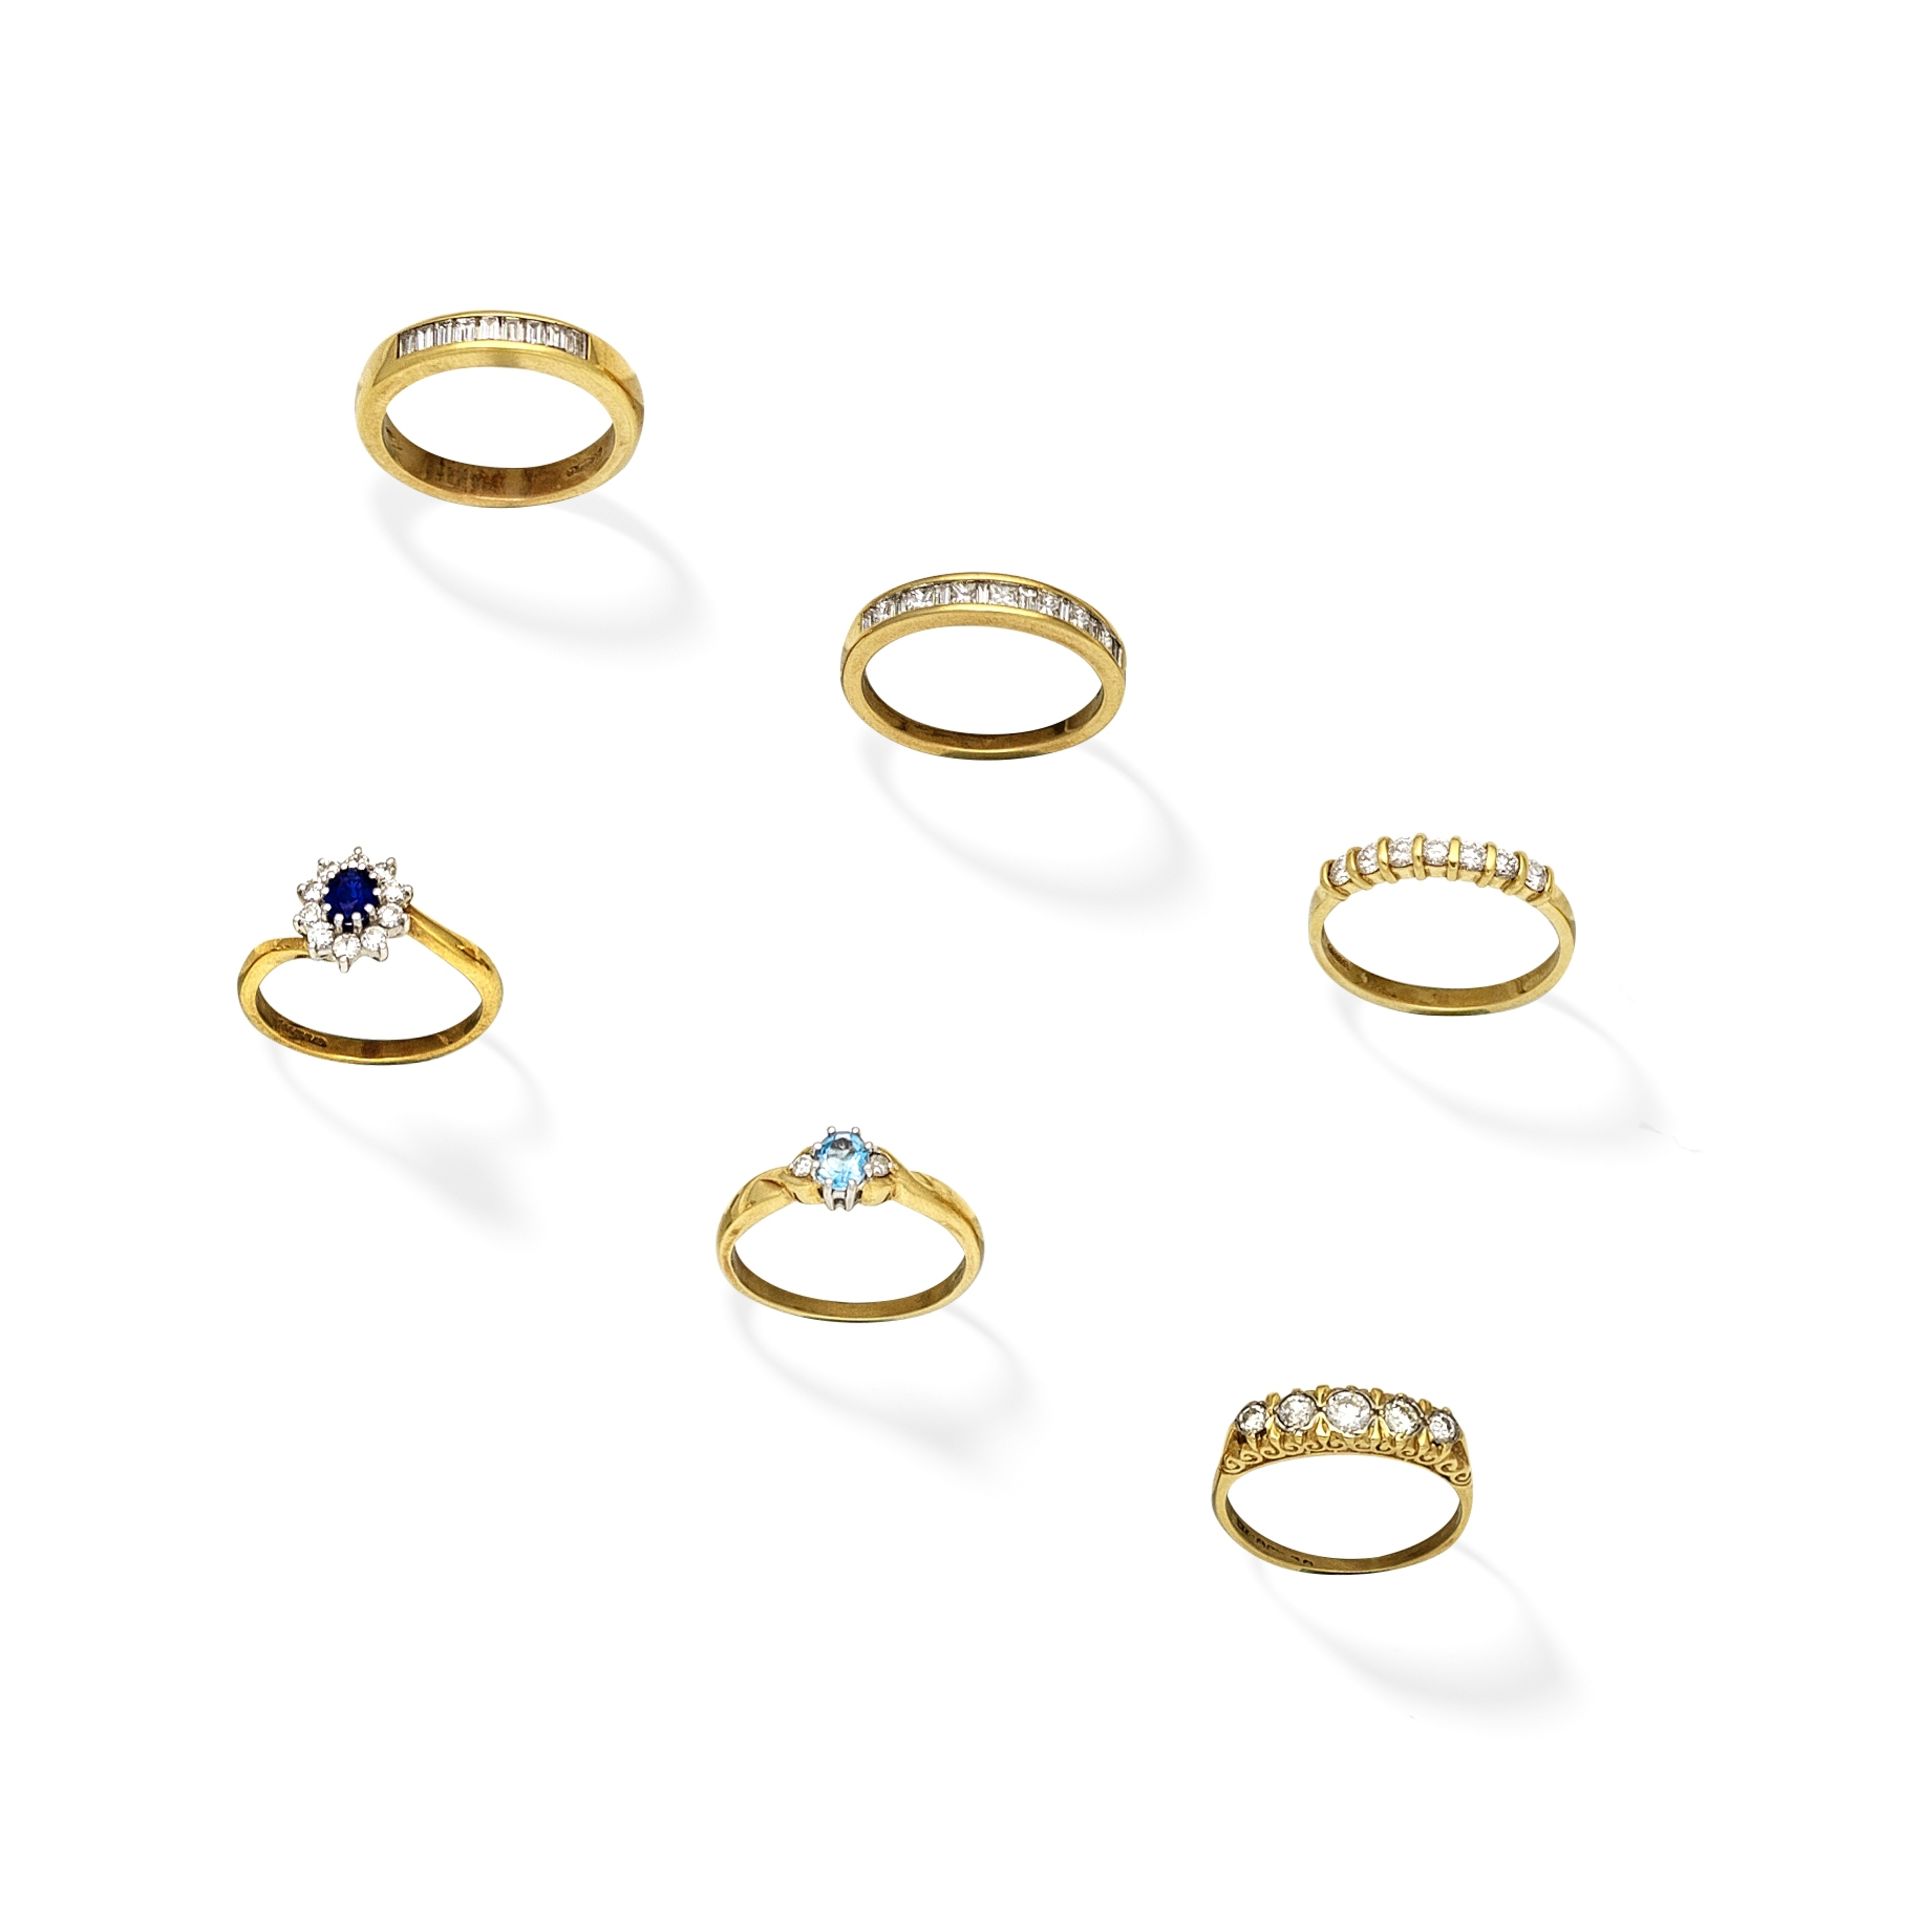 COLLECTION OF GEM-SET AND DIAMOND RINGS (6)